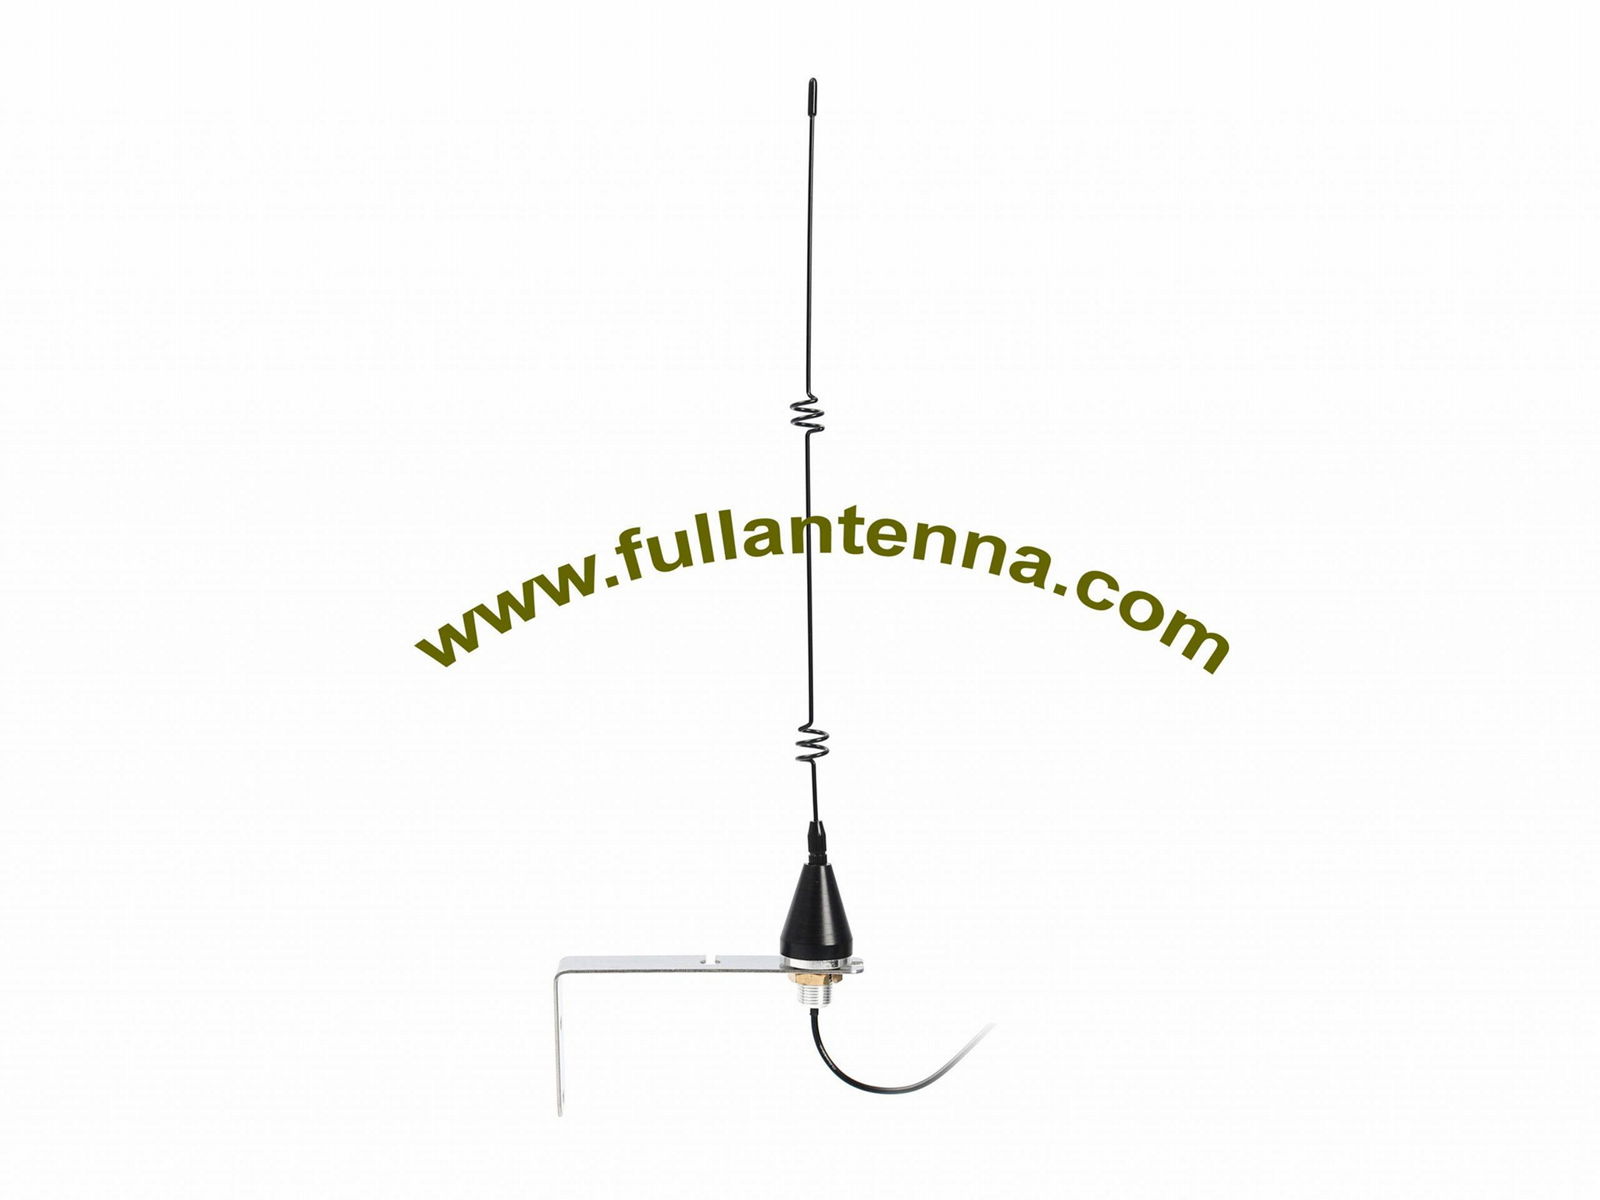 3G Wall Mount Indoor Antenna 5dbi Gain High Quality